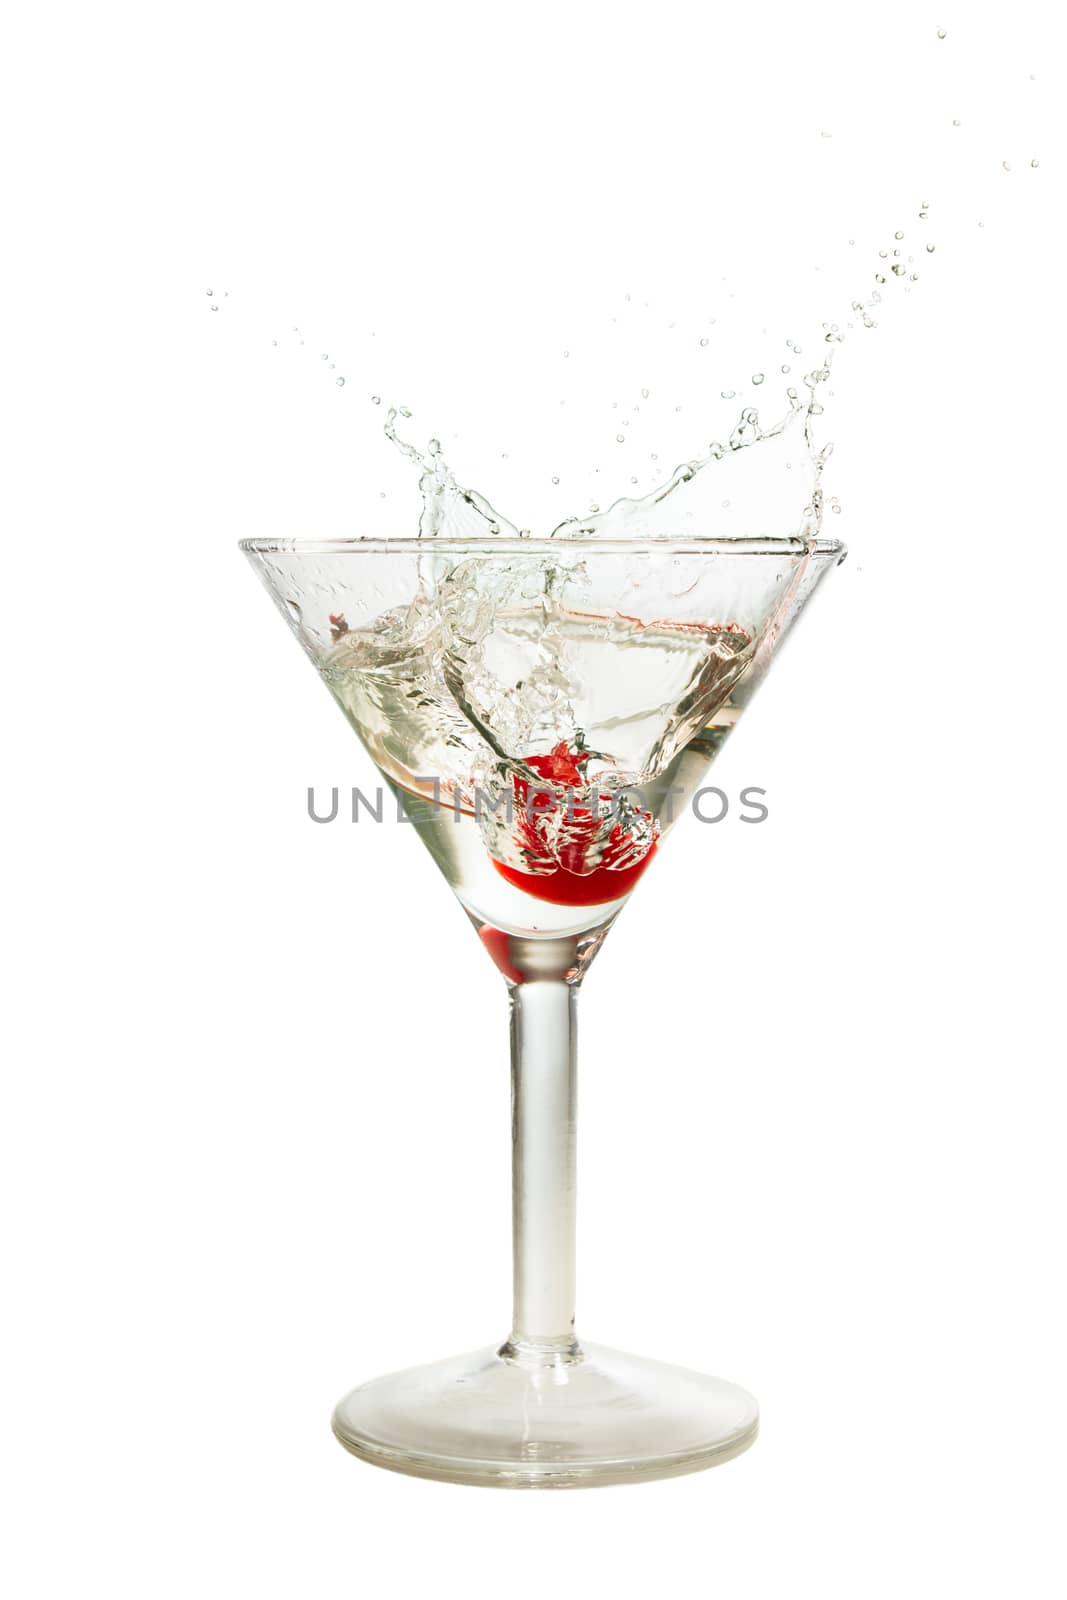 Splash of cherry in martini glass isolated on white background